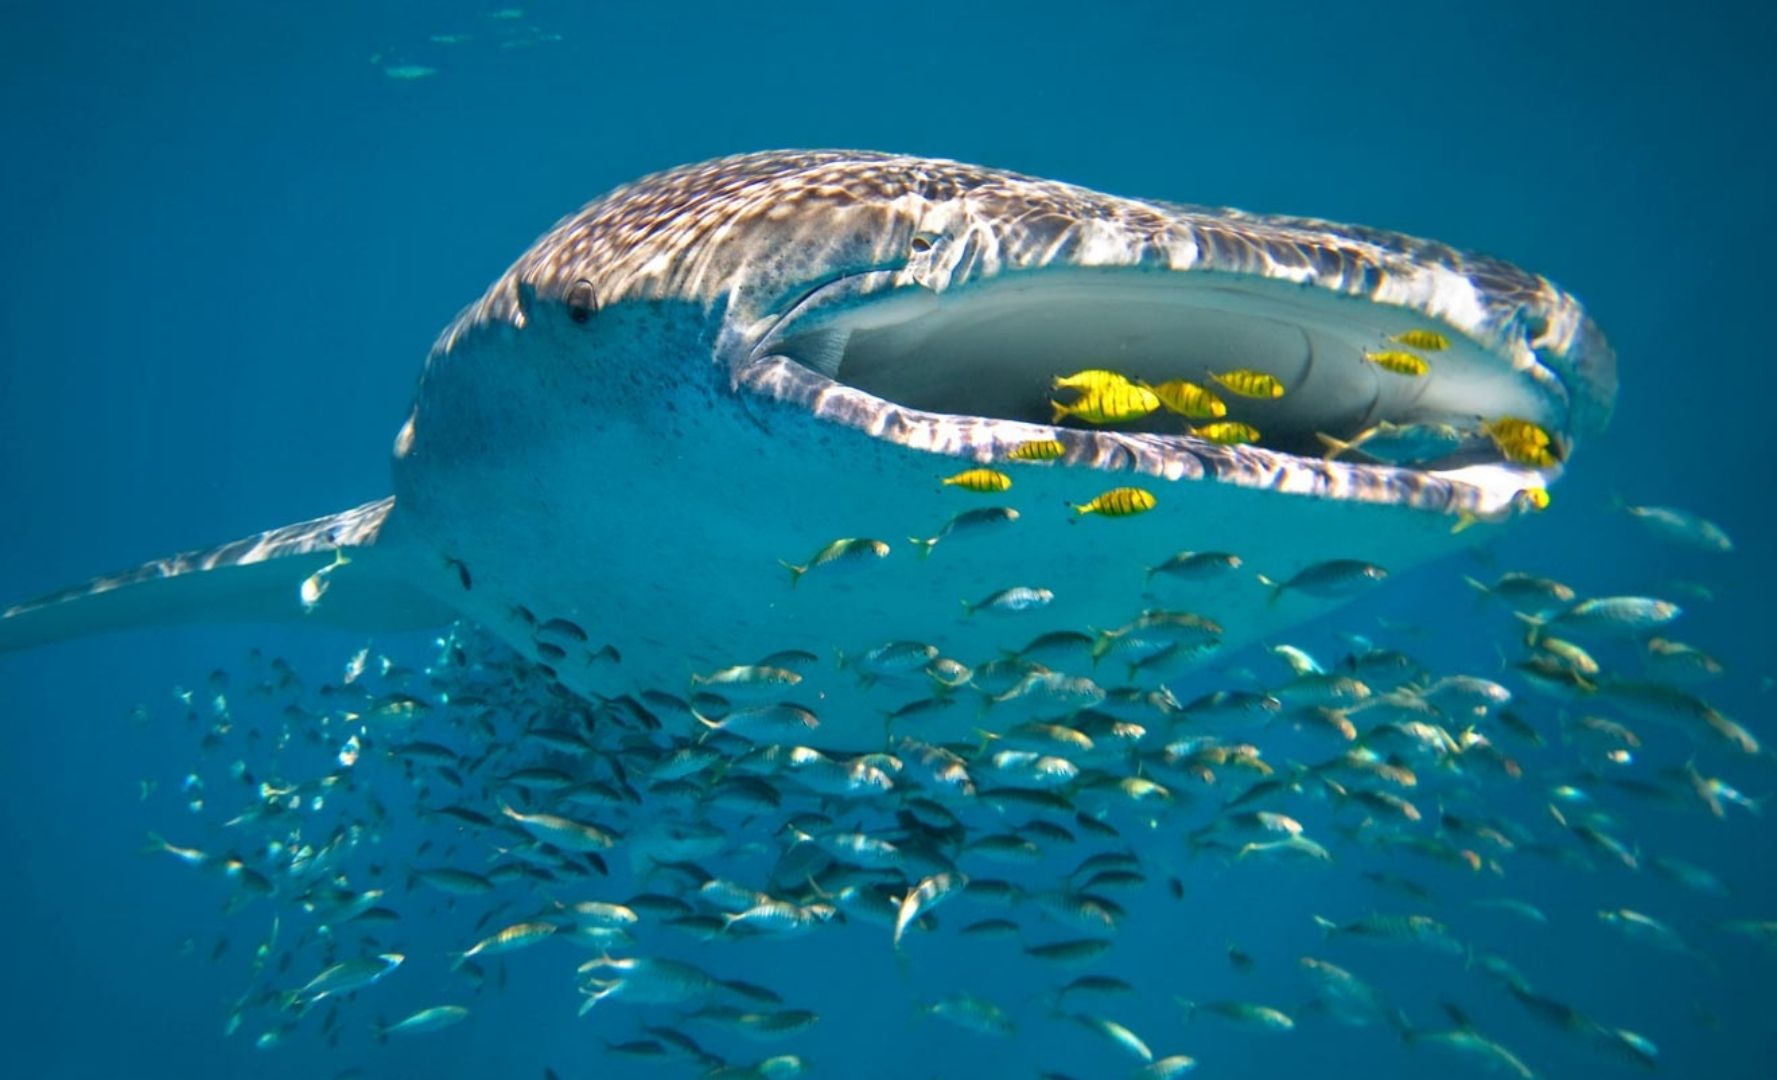 A whale shark underwater with fish around its mouth